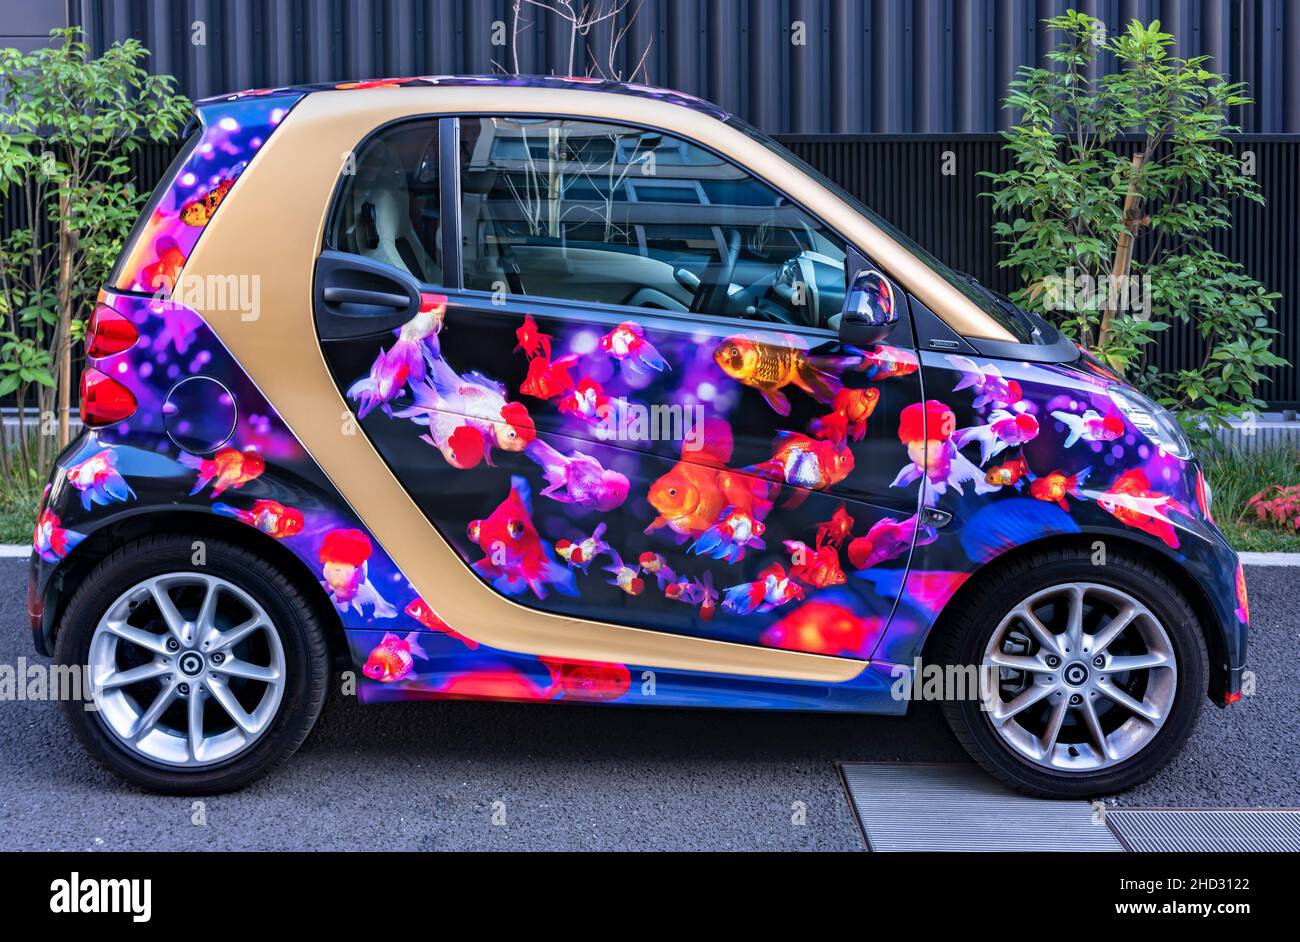 tokyo, japan - july 18 2021: Microcar of the brand called smart adorned with a vehicle vinyl wrap depicting Japanese multihued goldfishes with long ta Stock Photo